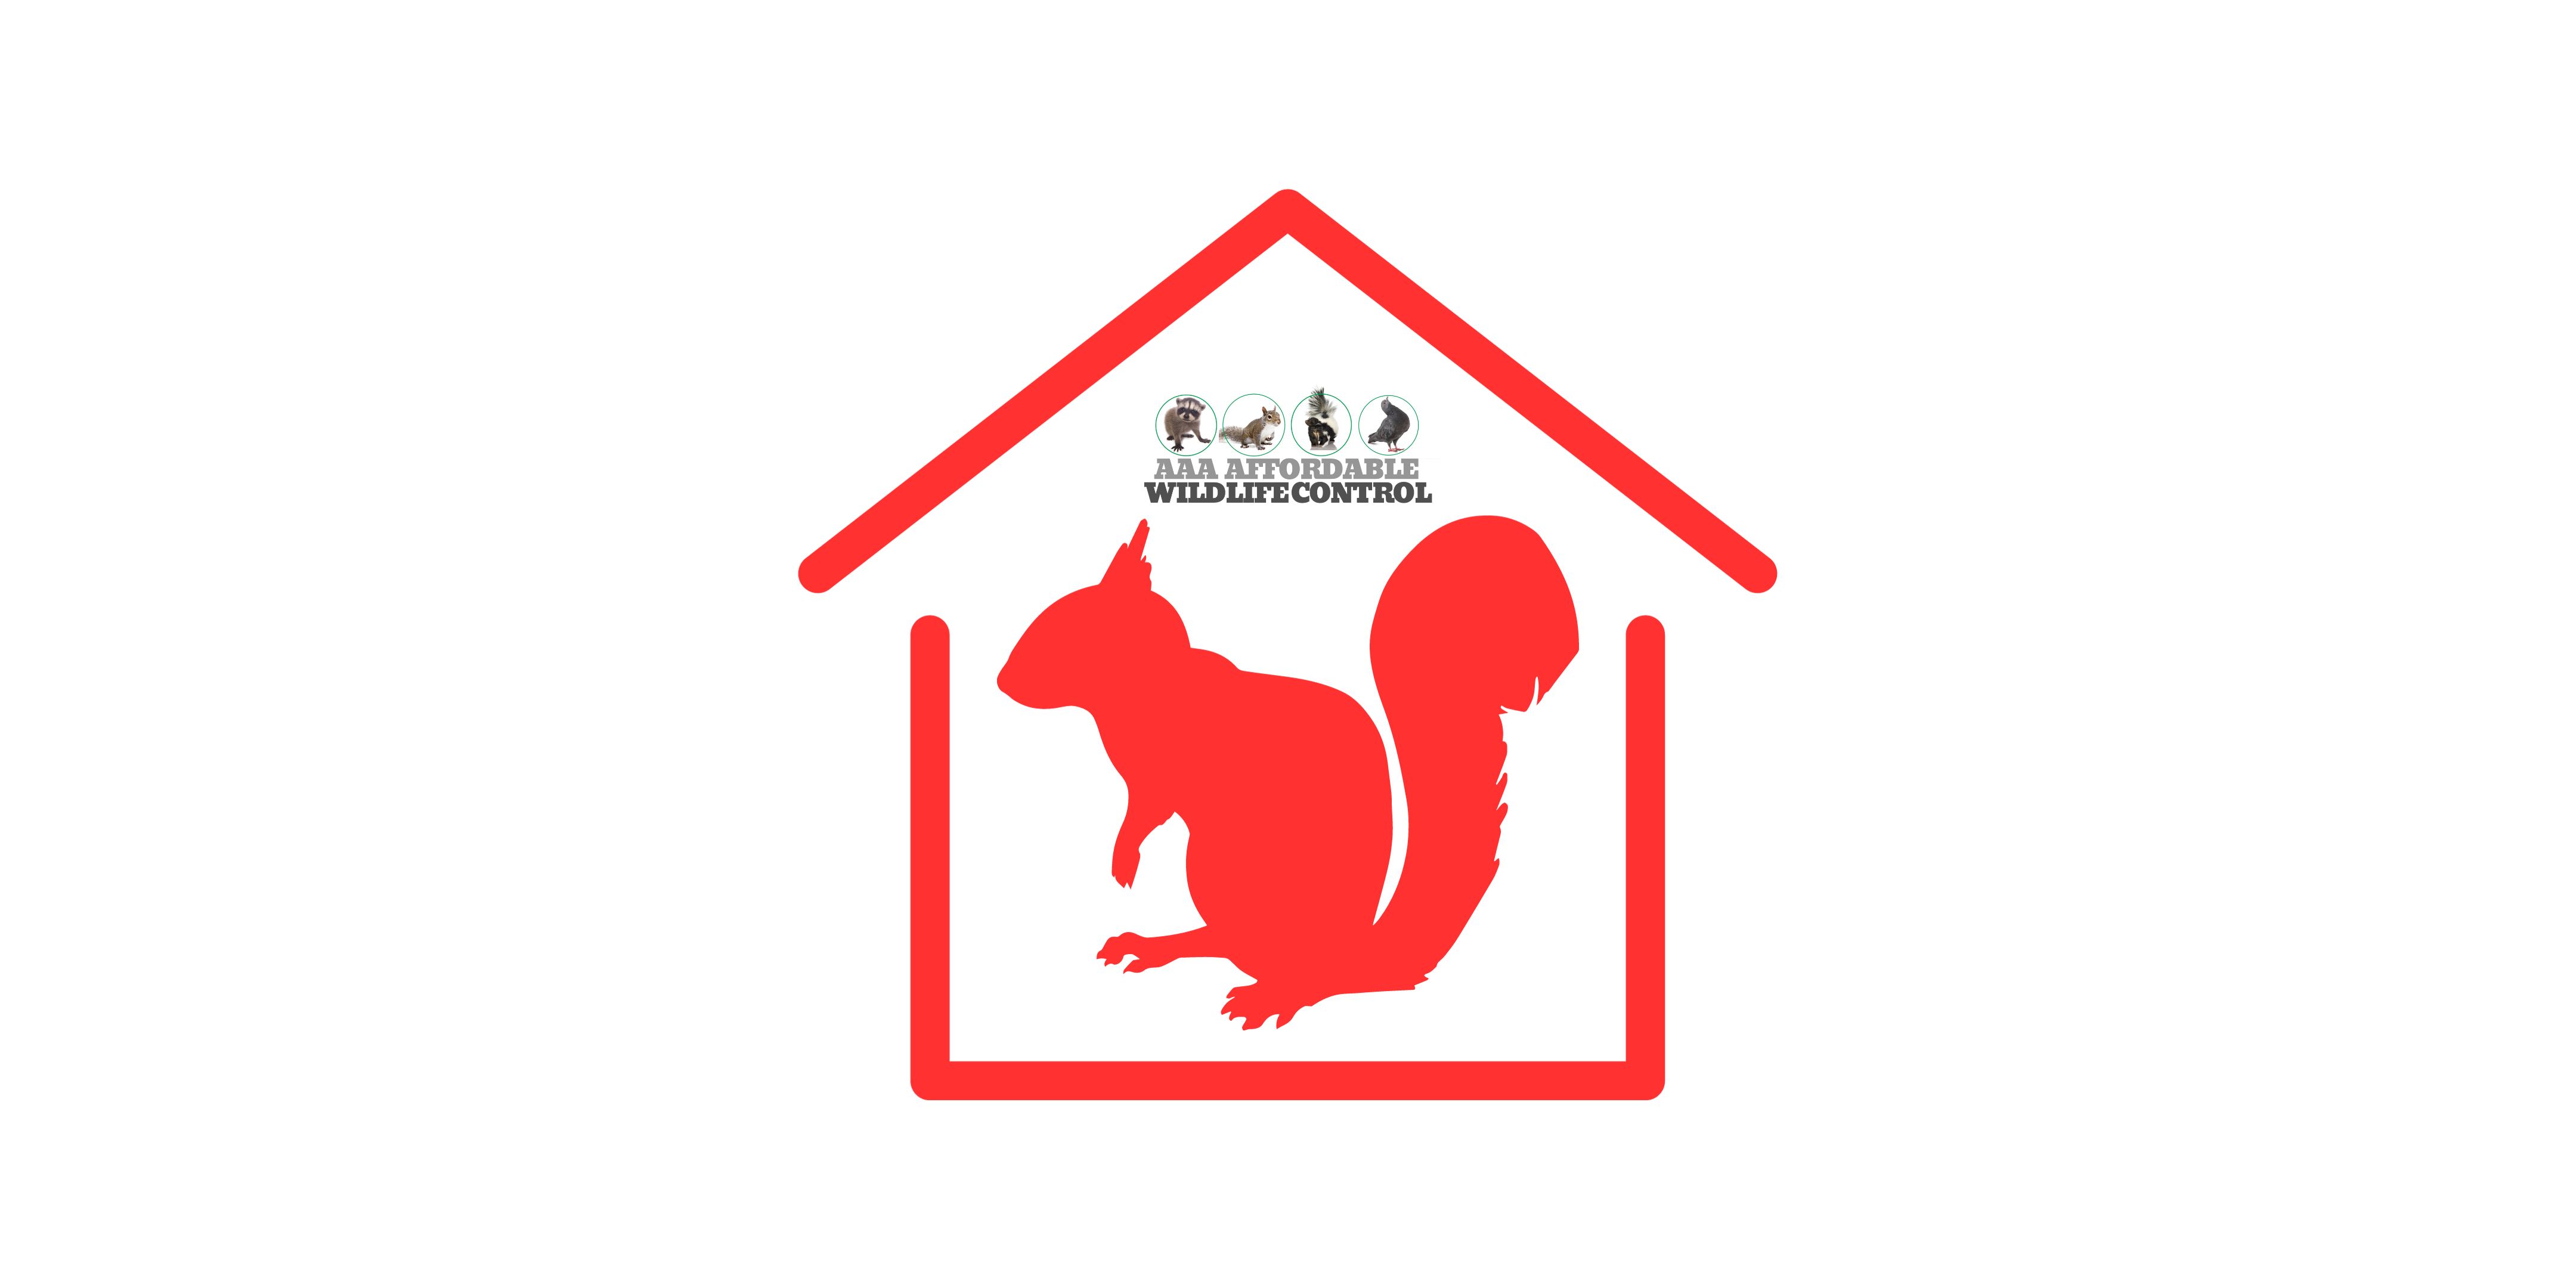 How to Get Rid of Squirrels in Attic and Walls